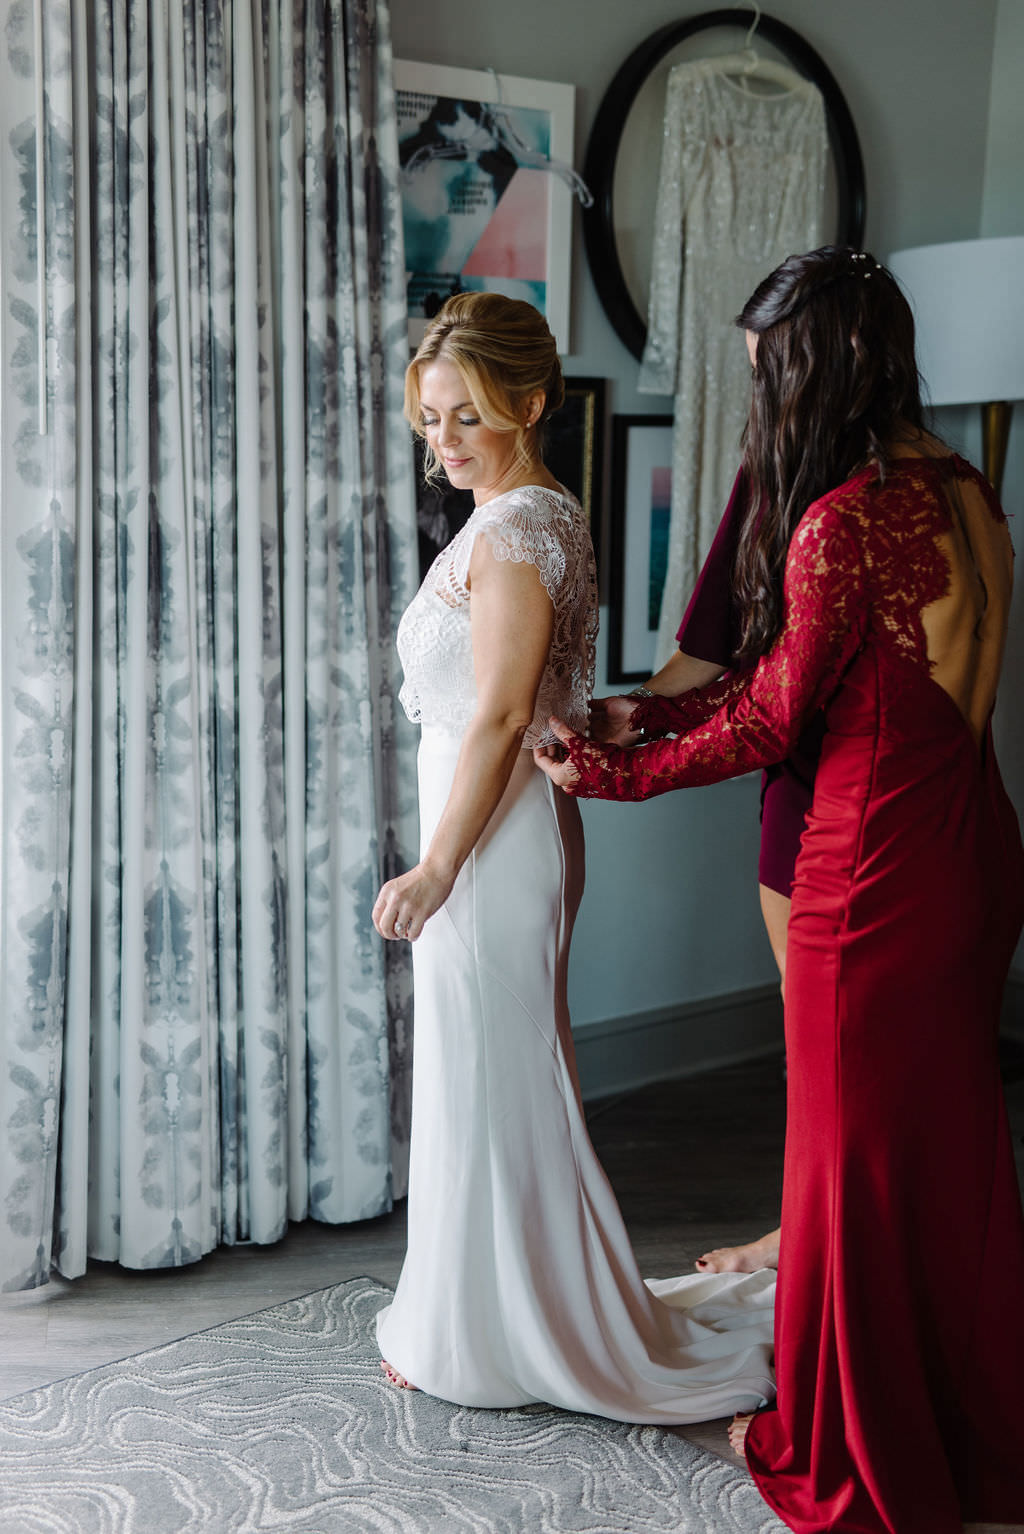 Bride Getting Ready Wedding Portrait | St. Pete Wedding Photographer Kera Photography | St. Pete Wedding Hair and Makeup Artist Michele Renee the Studio